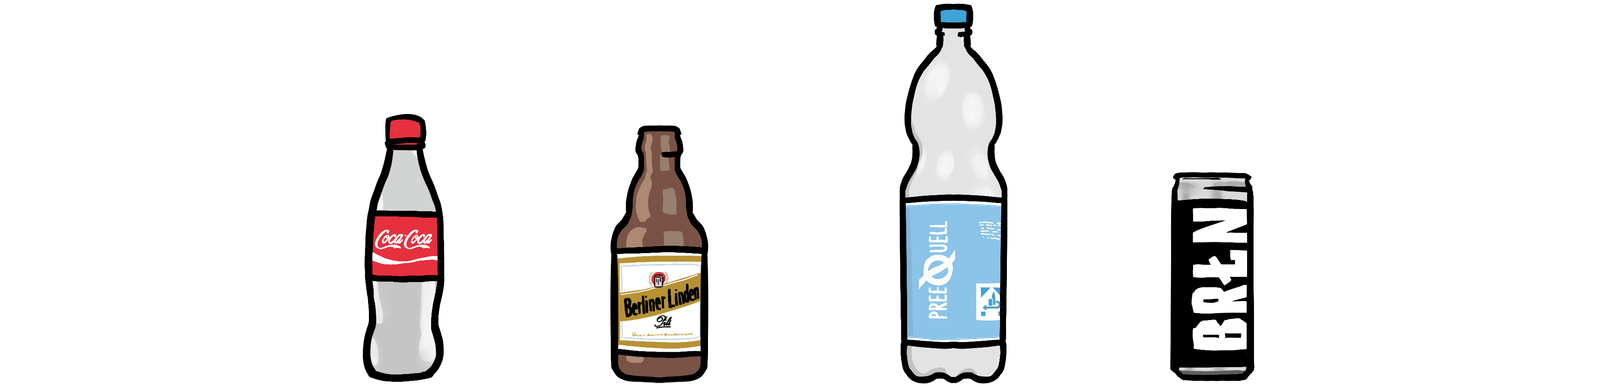 Illustration of bottles with a deposit (Pfand)